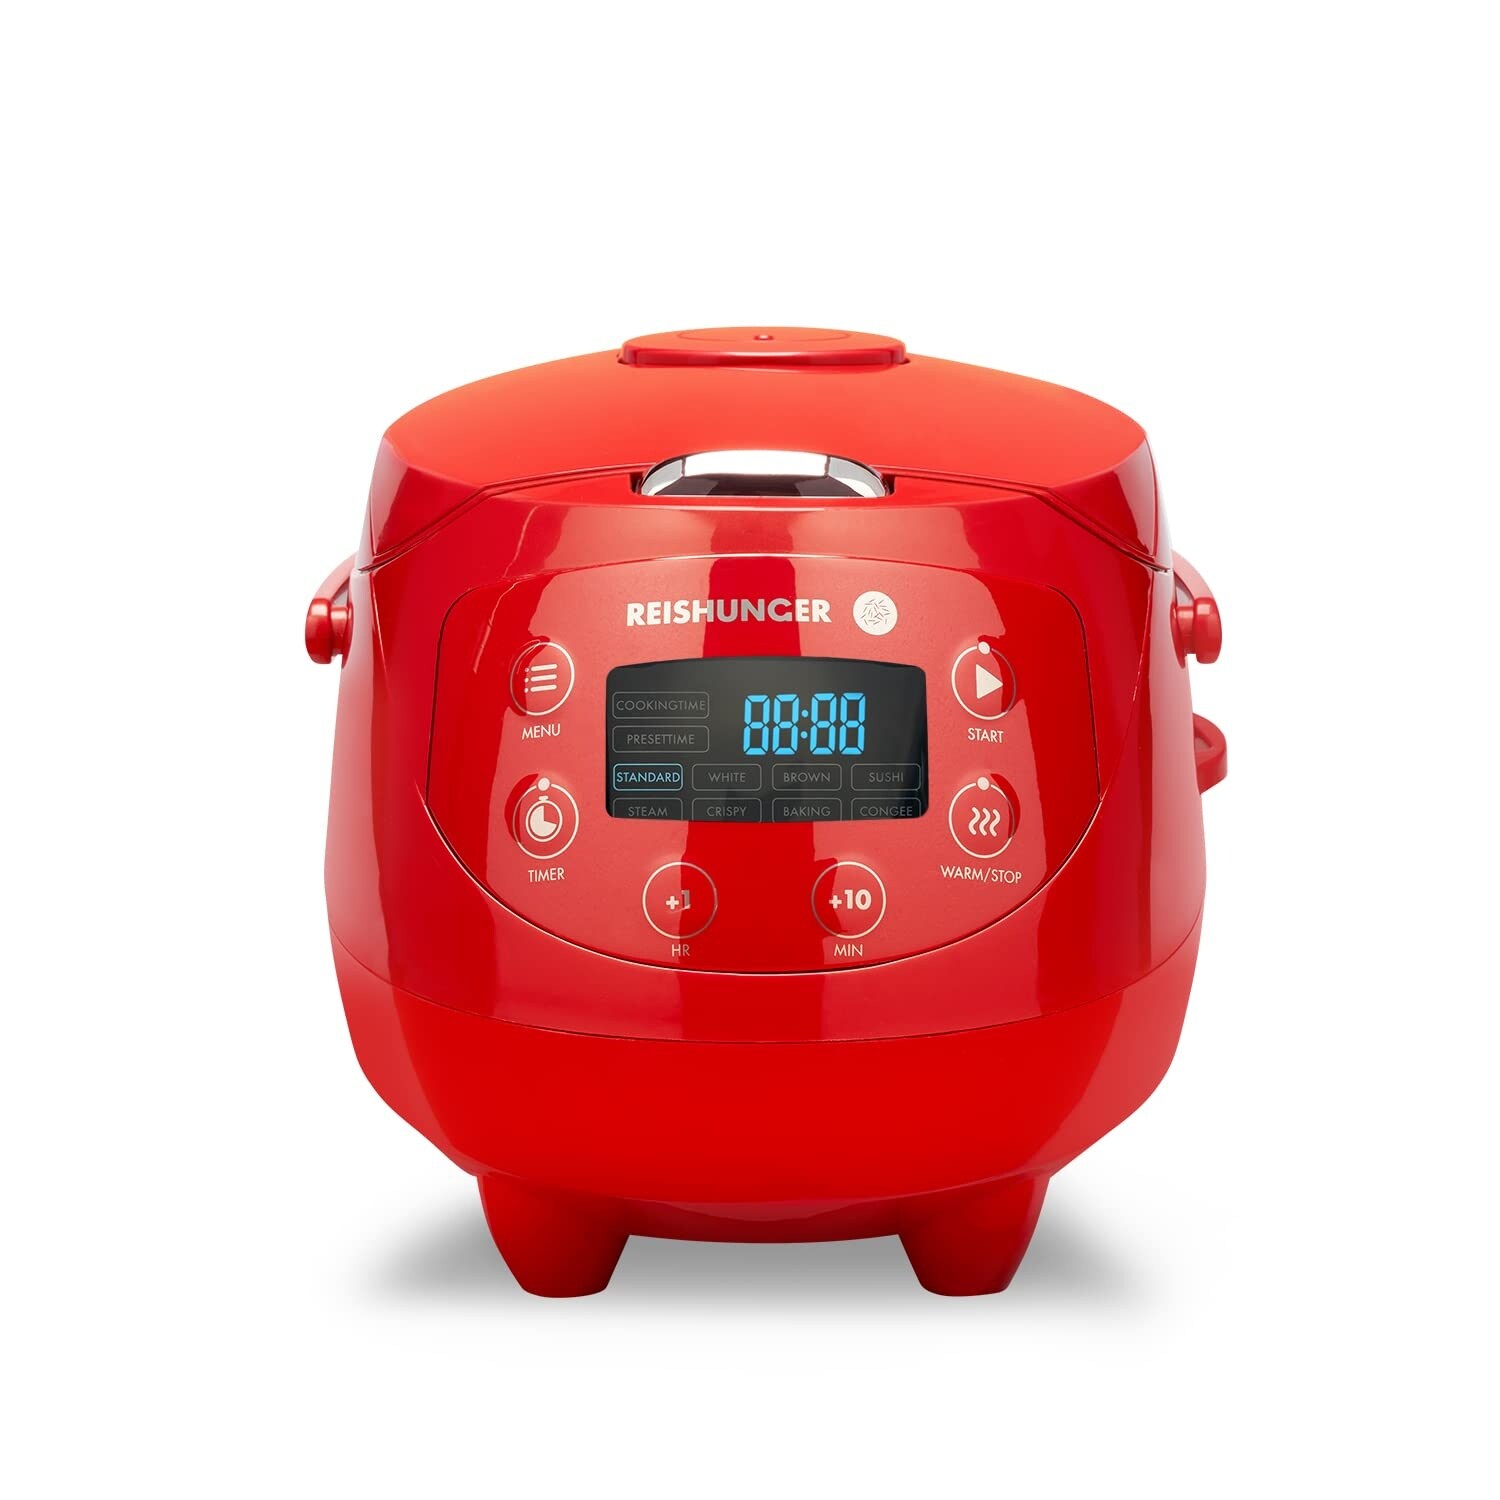 Digital Mini Rice Cooker & Steamer, with Keep-Warm & Timer, 3.5 Cups Small Rice Cooker with Ceramic Inner Pot - 8 Programs - Red